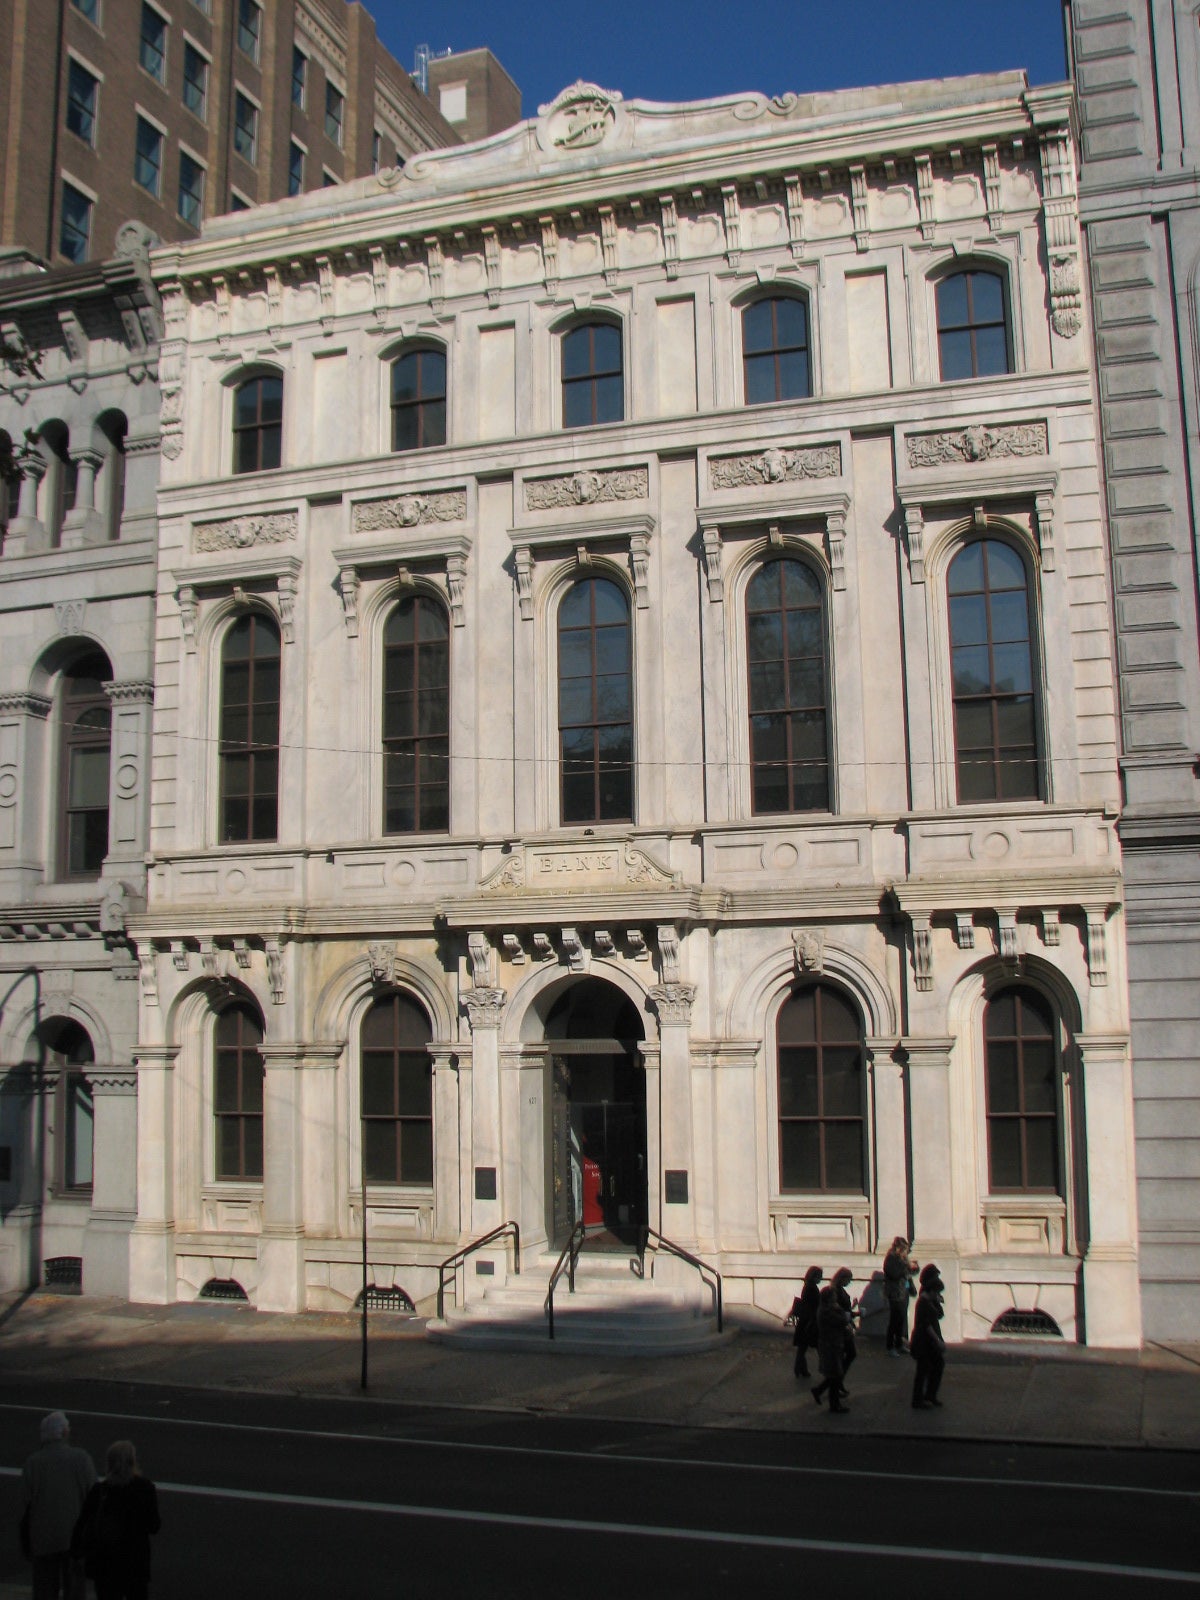 The white marble façade of Farmers’ and Mechanics’ Bank sets it apart from its neighbors.